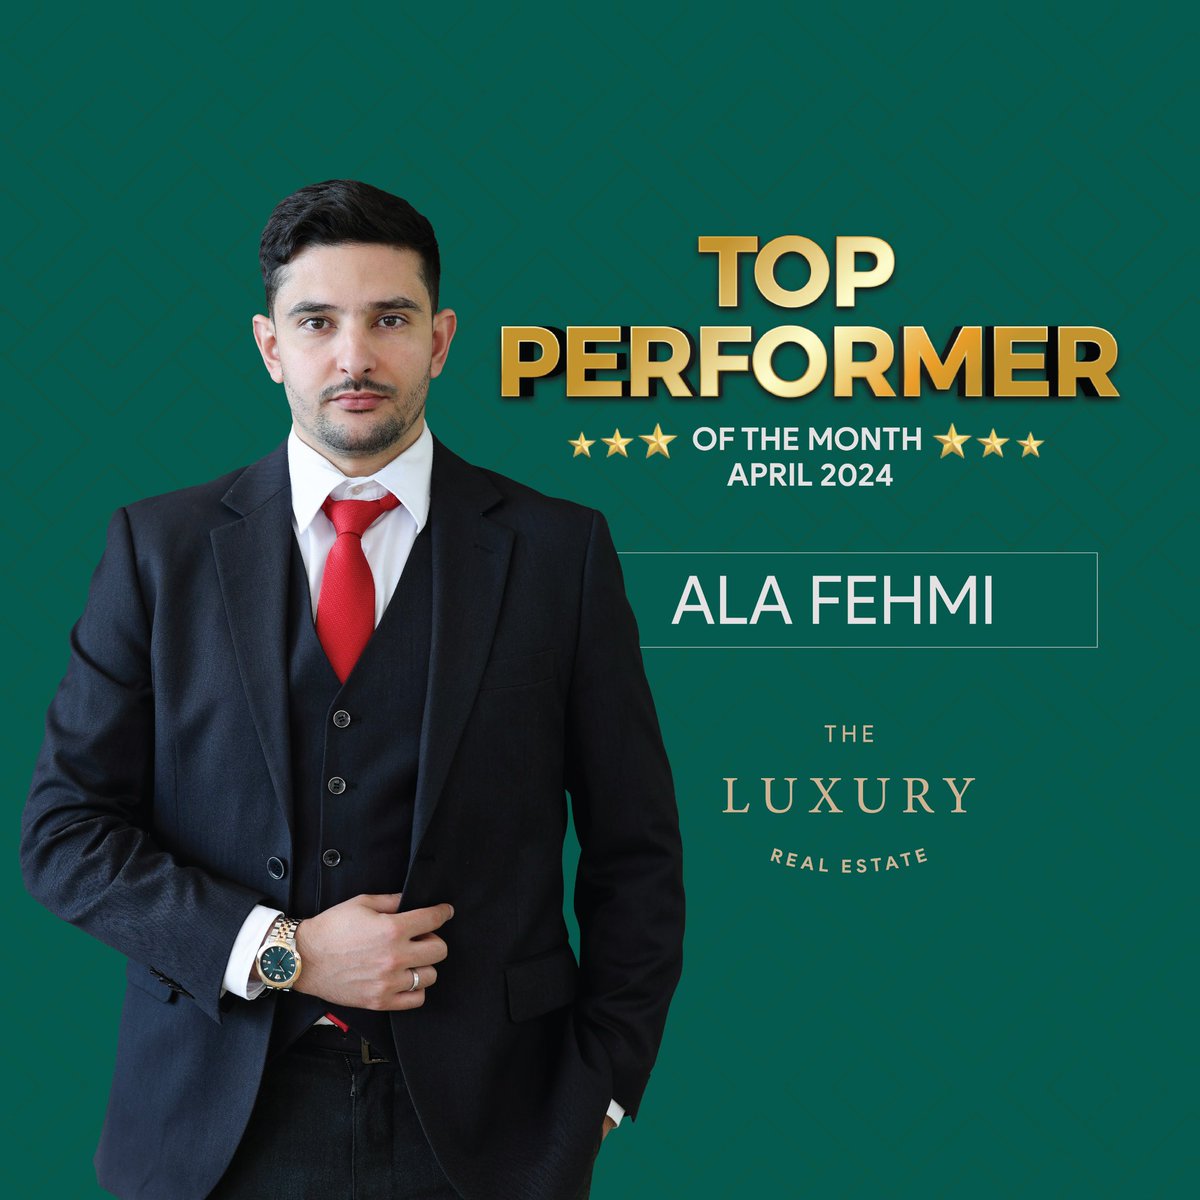 Congratulations Mr. Ala Fehmi for being one of the top performers for the month of April 2024! Your unwavering dedication and commitment to excellence have set a new standard for success. Keep it up!

#achievers #topperformers #topperformersofthemonth #realestateexperts